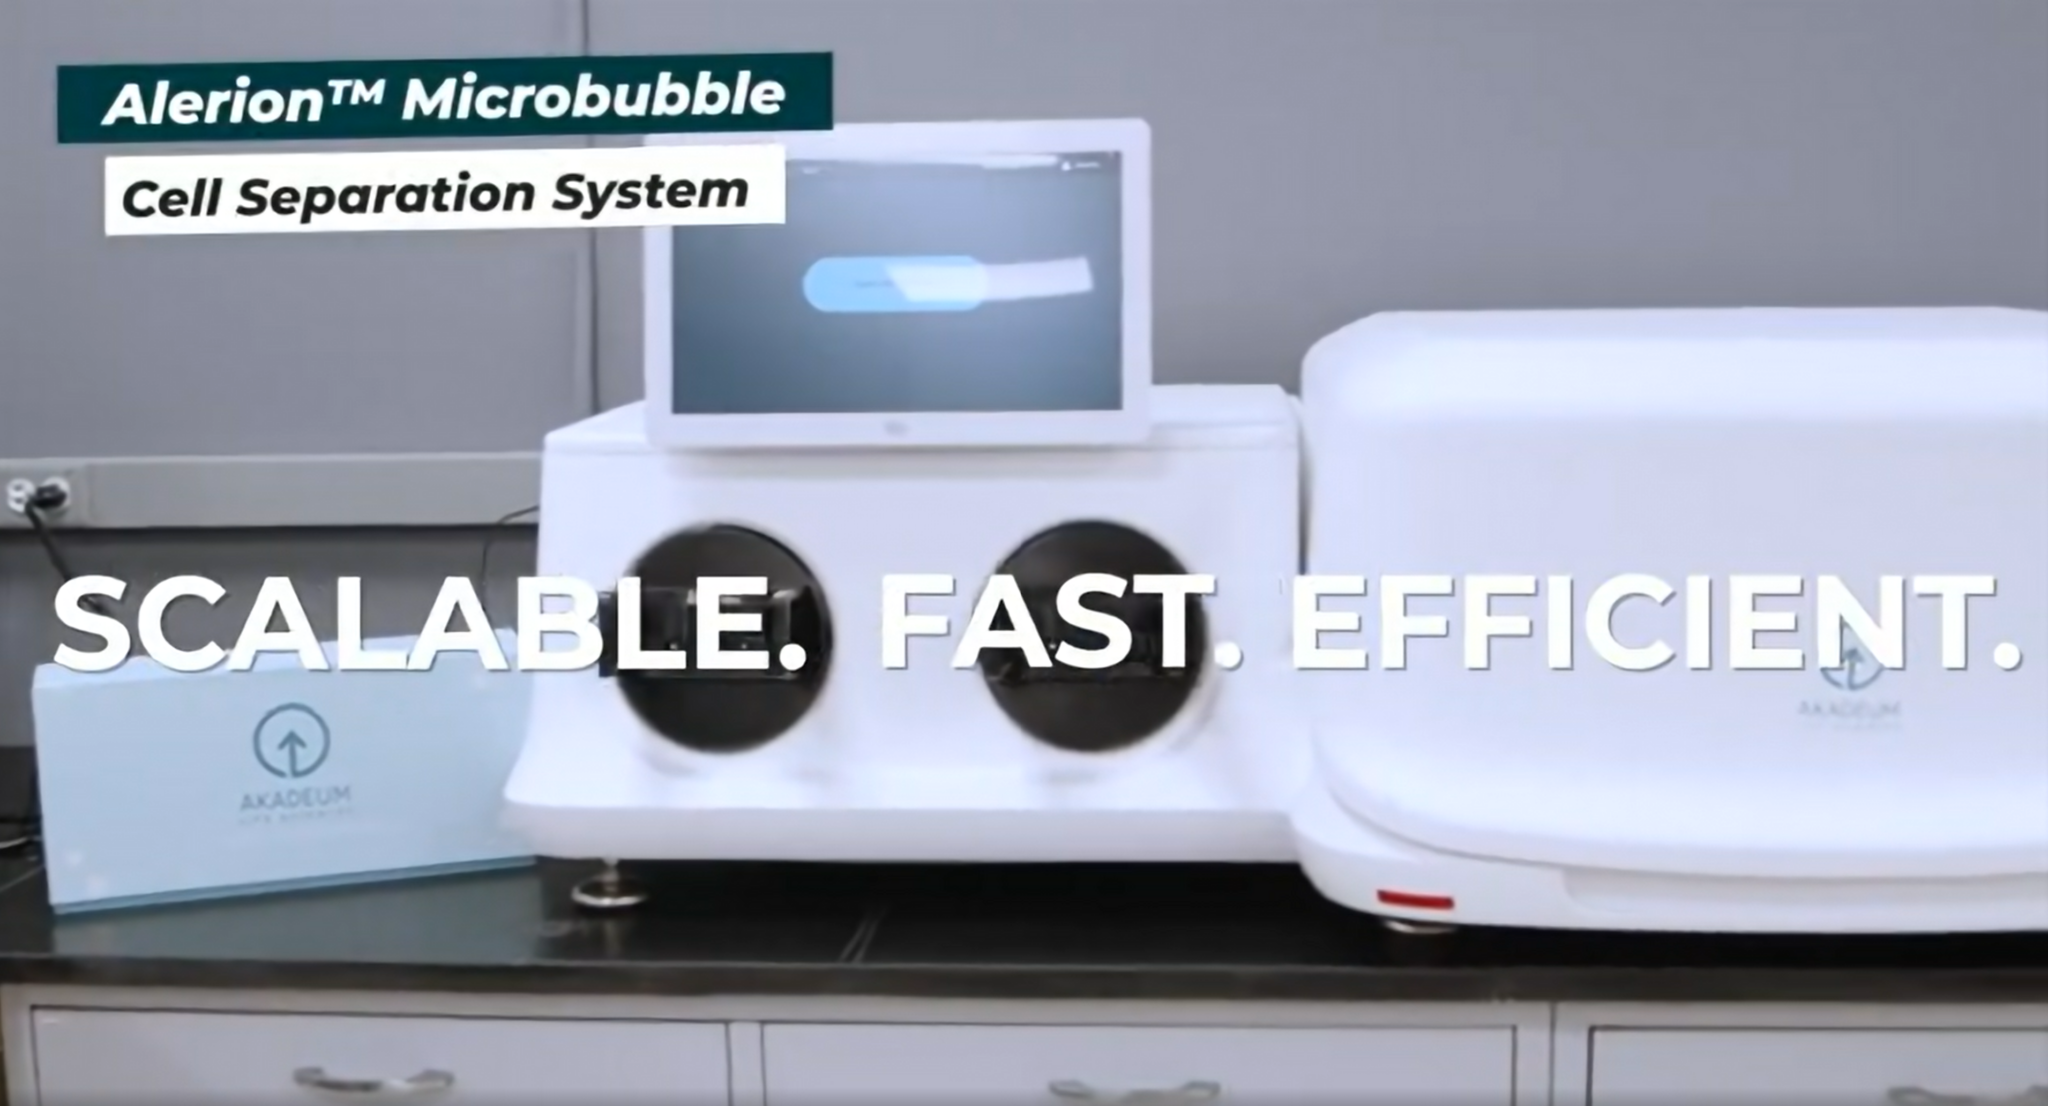 Alerion™ Microbubble Cell Separation System – Scalable. Fast. Efficient.